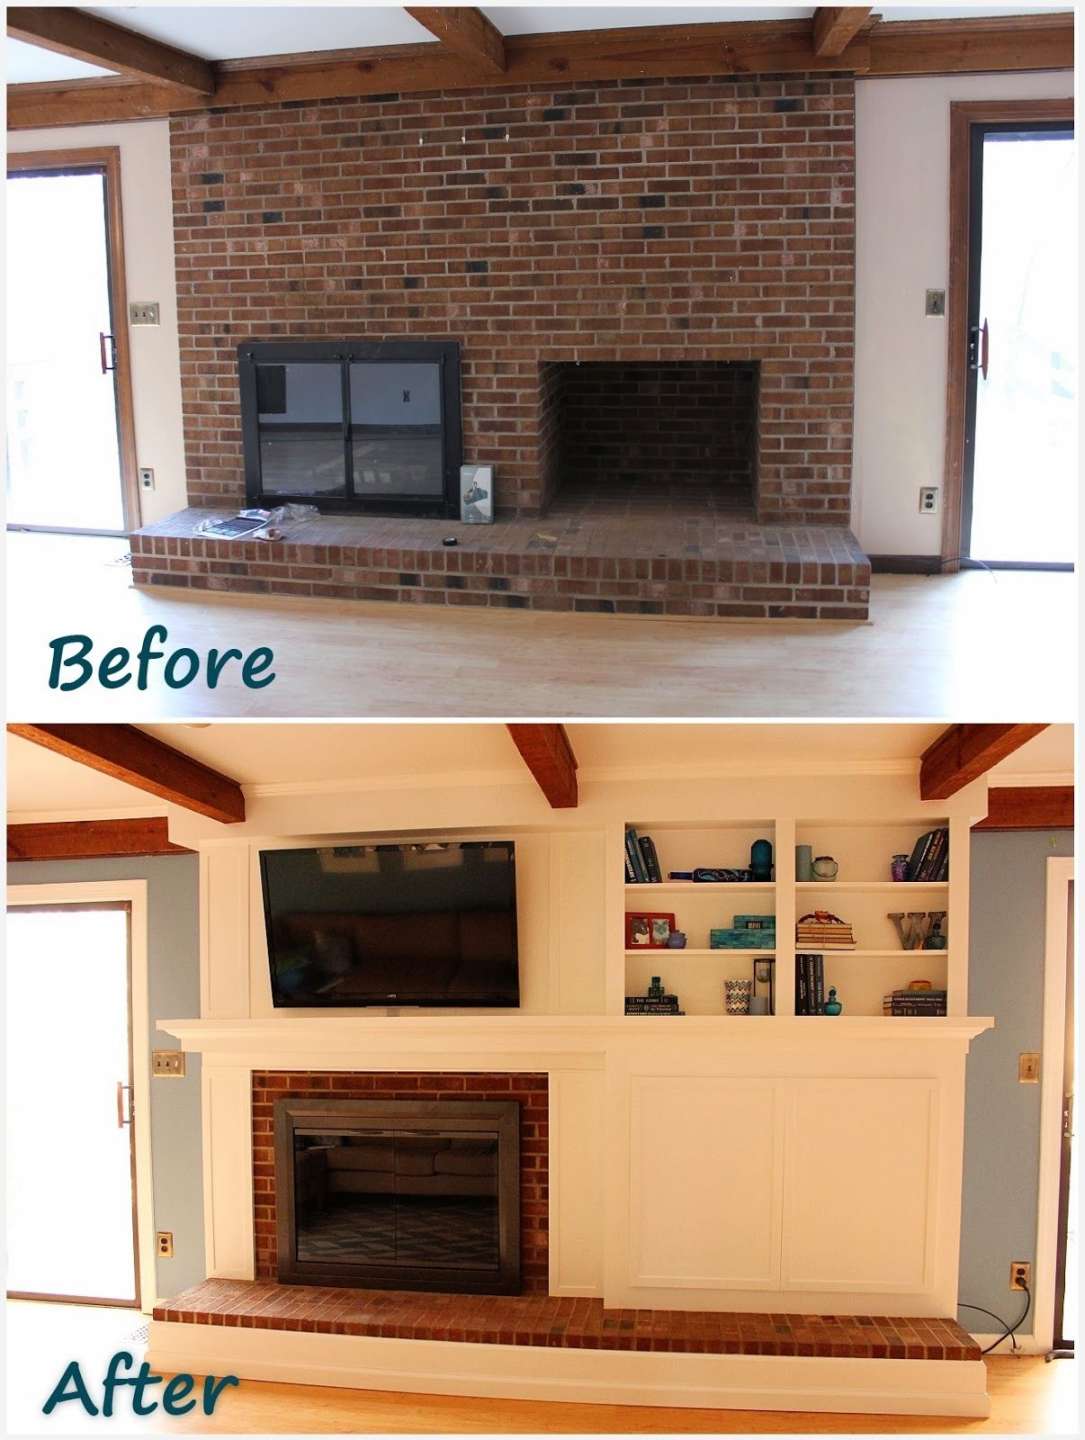 Fireplace Remodel: DIY a fireplace facade to cover an old brick